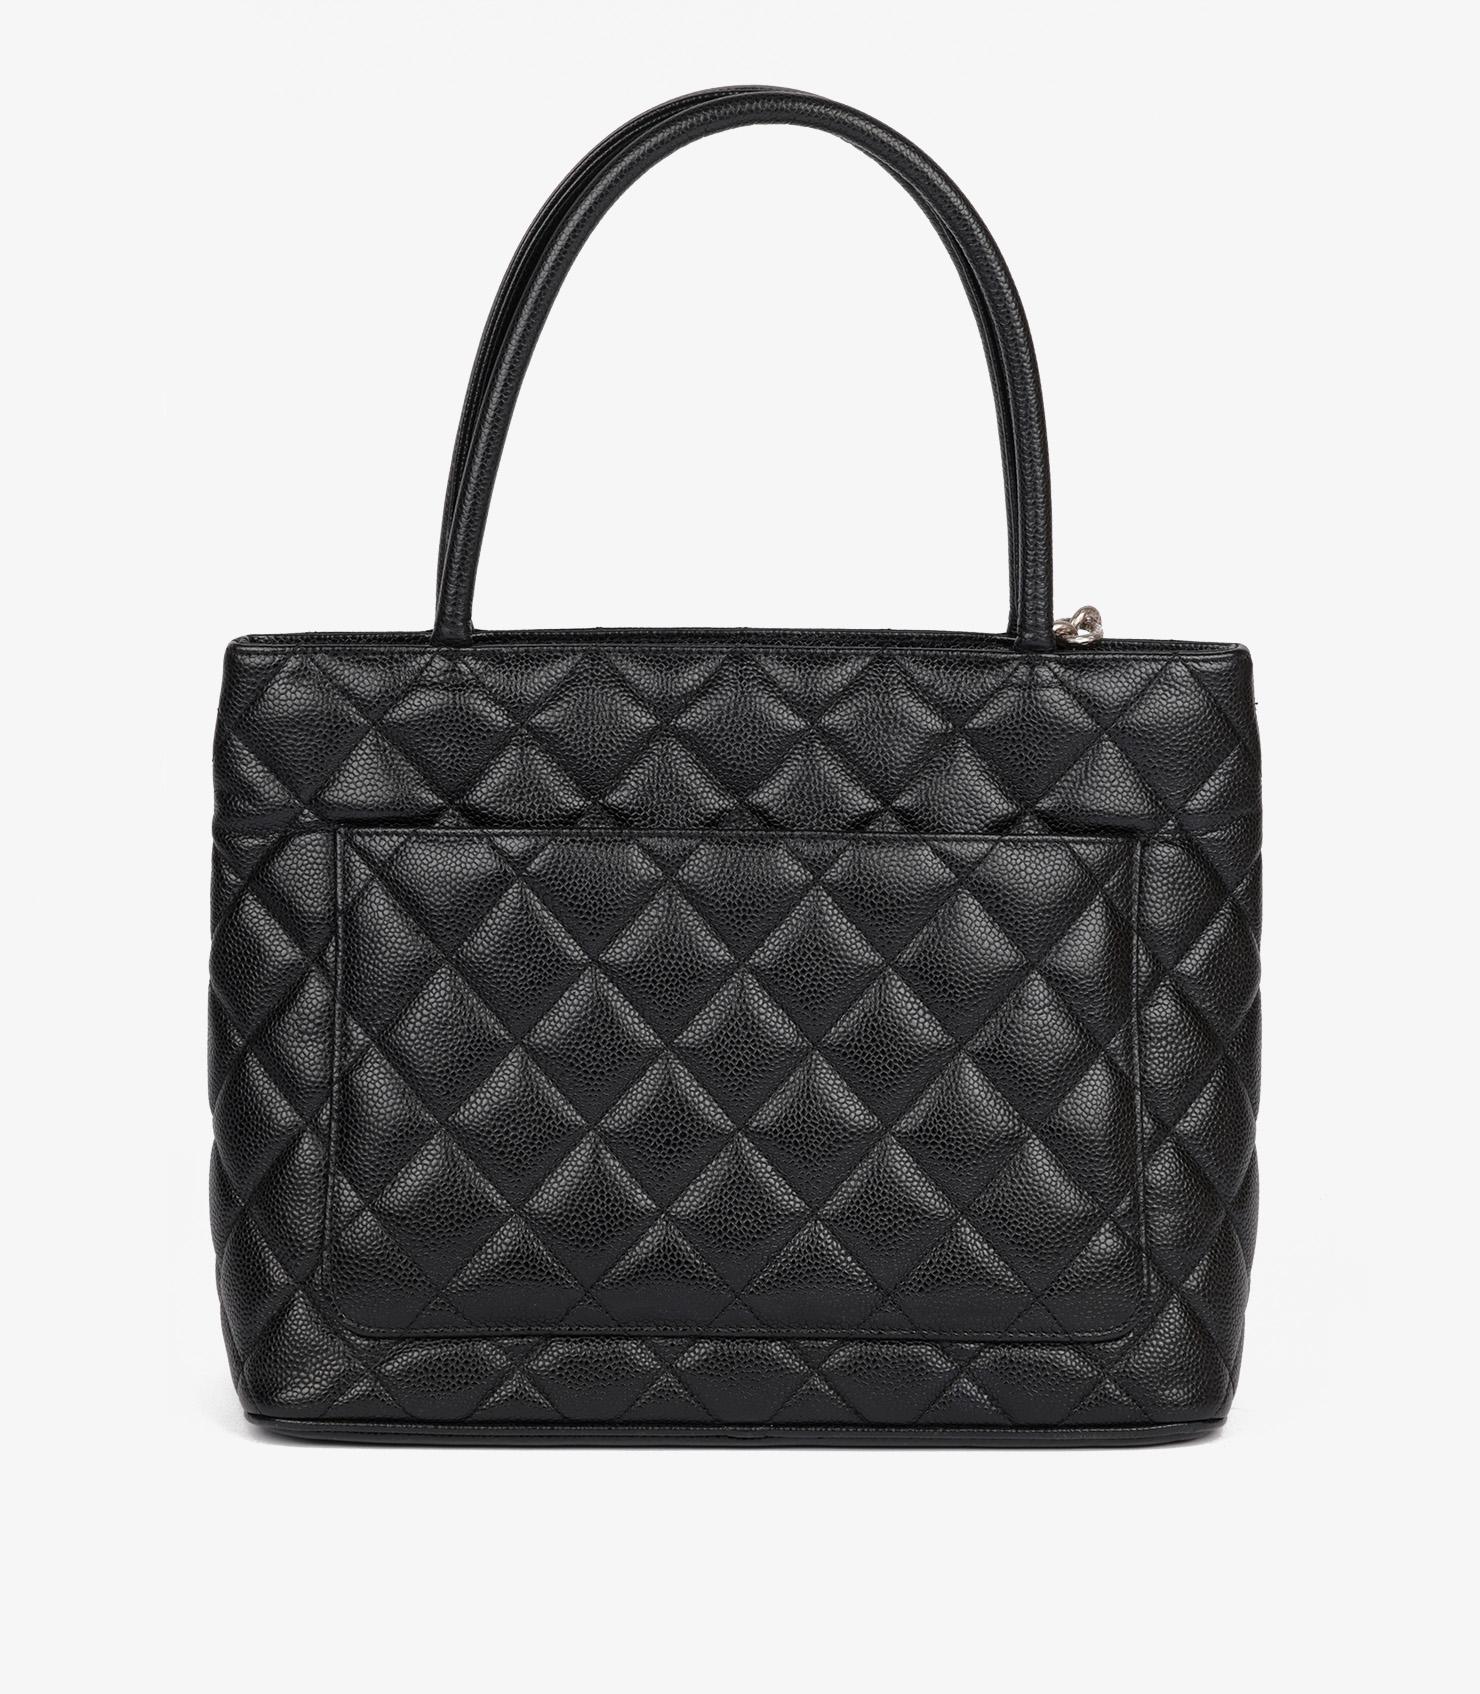 Chanel Black Quilted Caviar Leather Vintage Medallion Tote 2